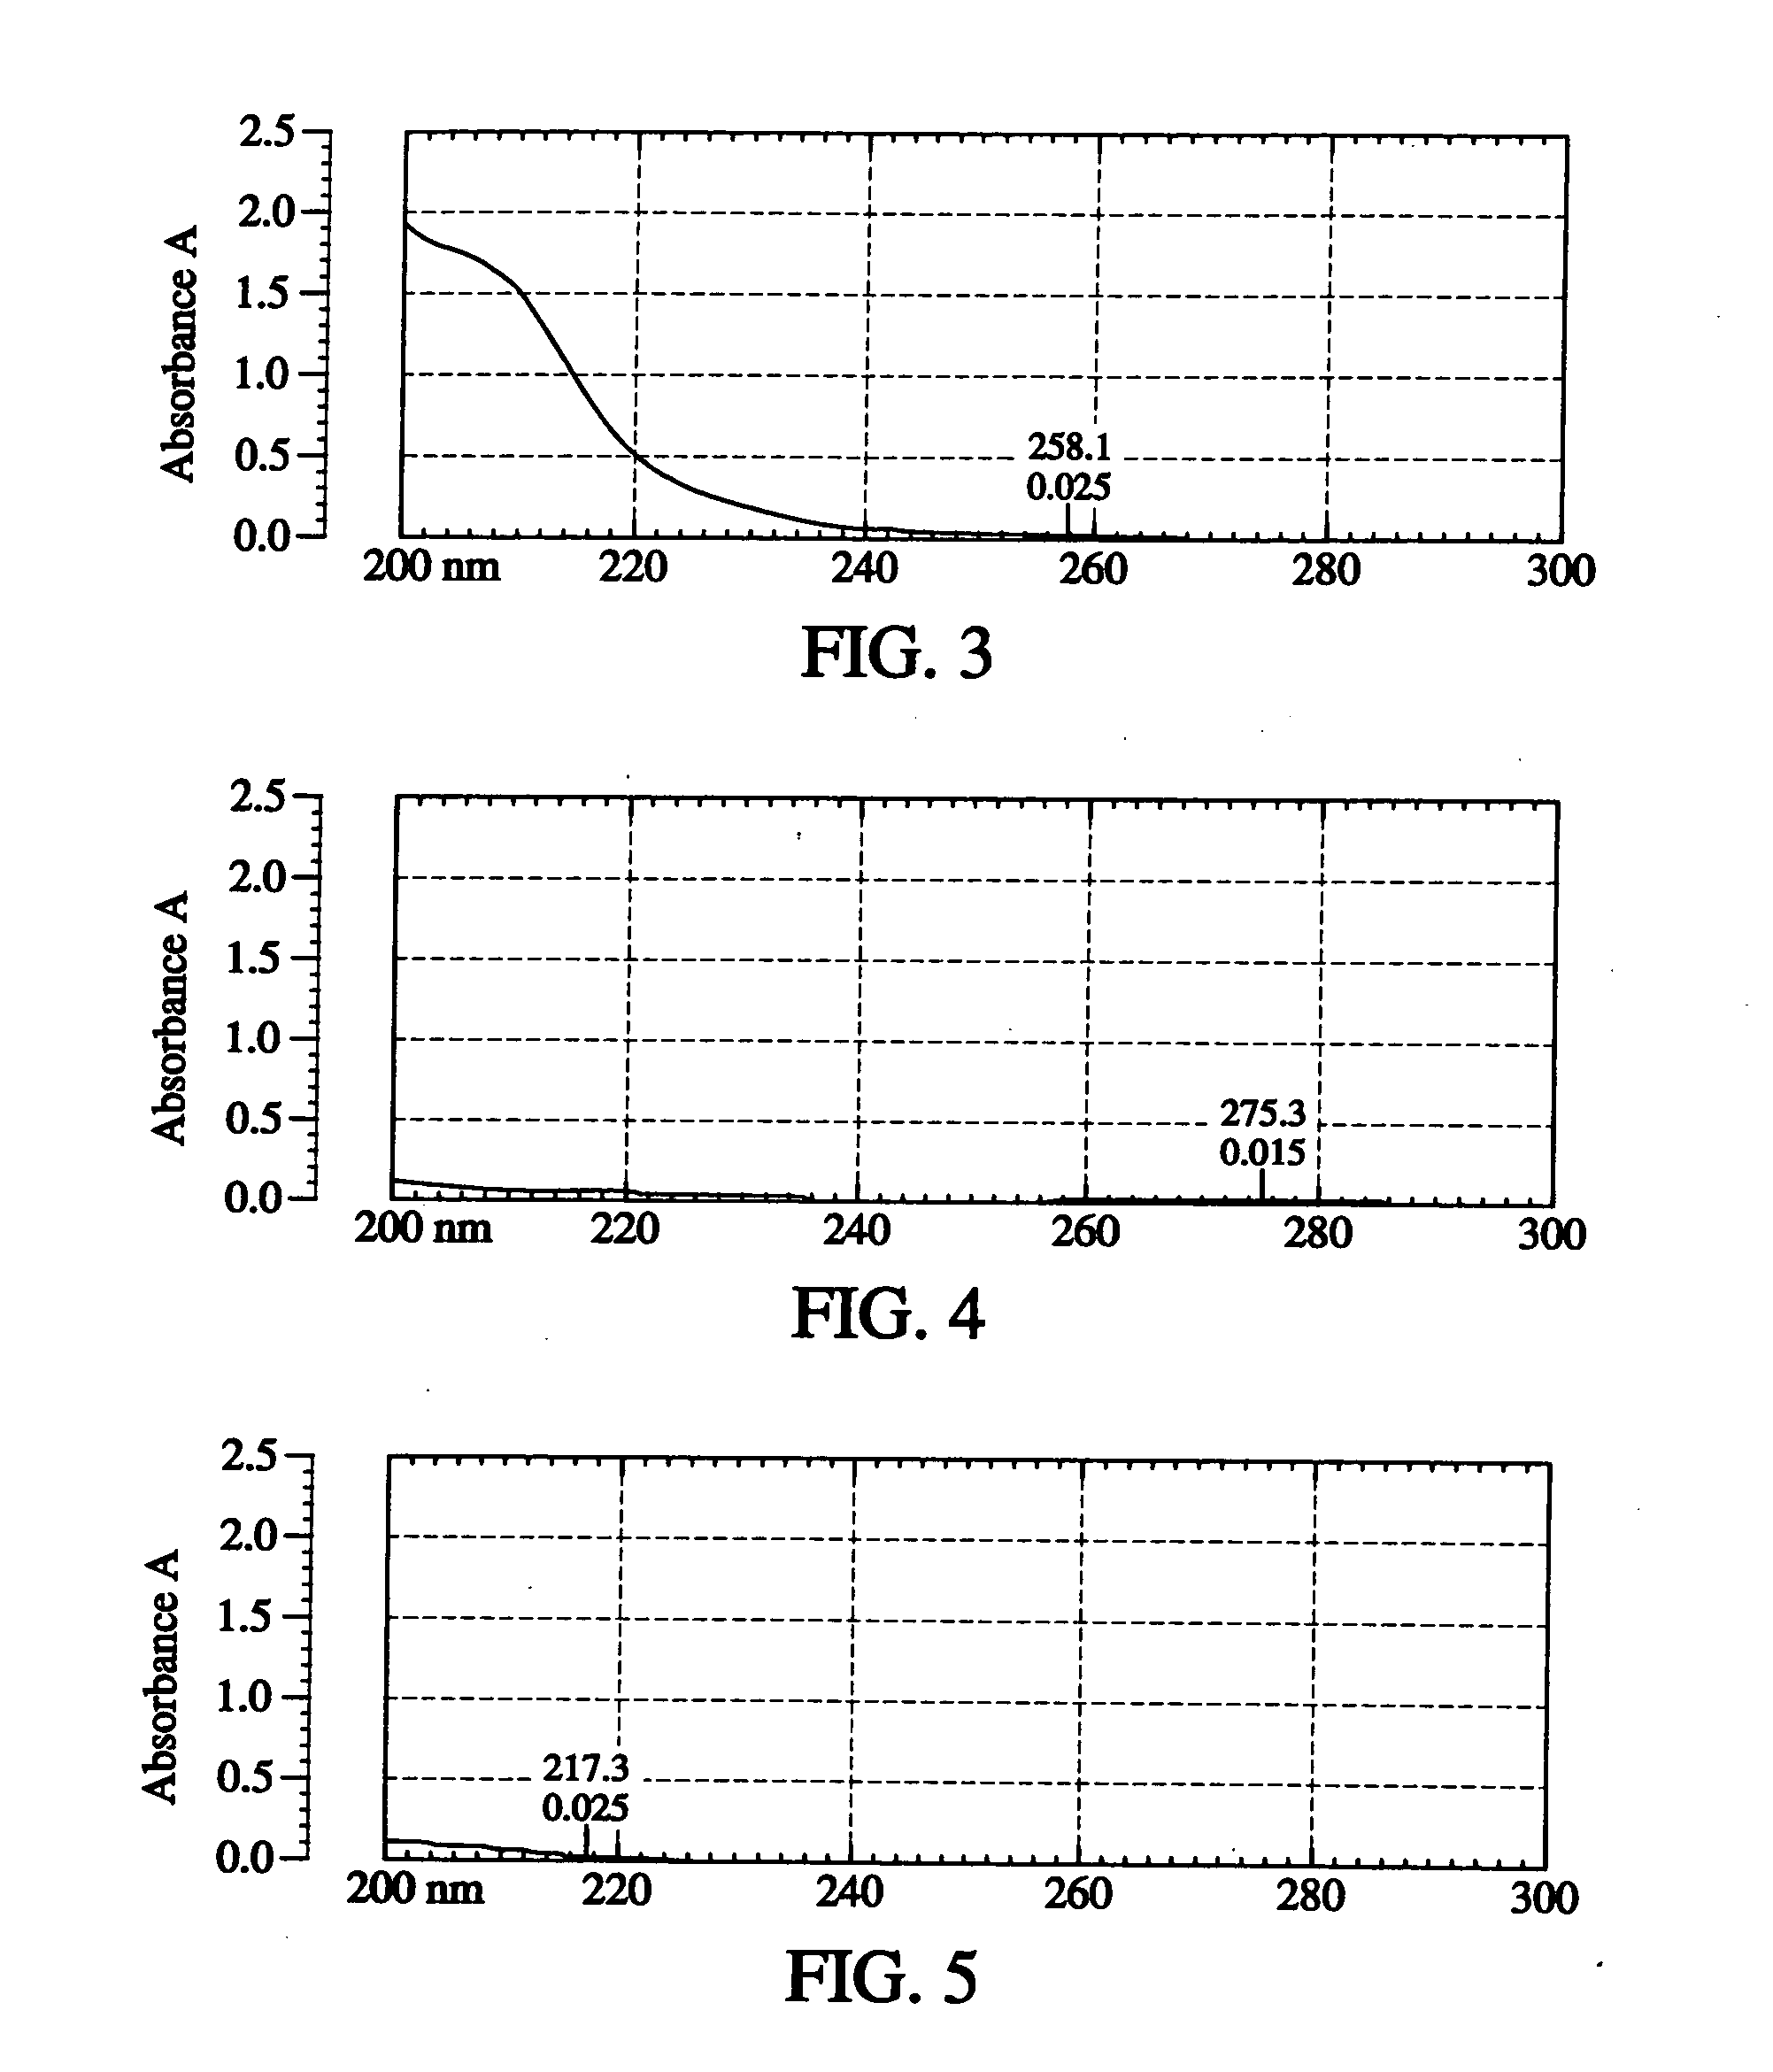 Abuse potential reduction in abusable substance dosage form